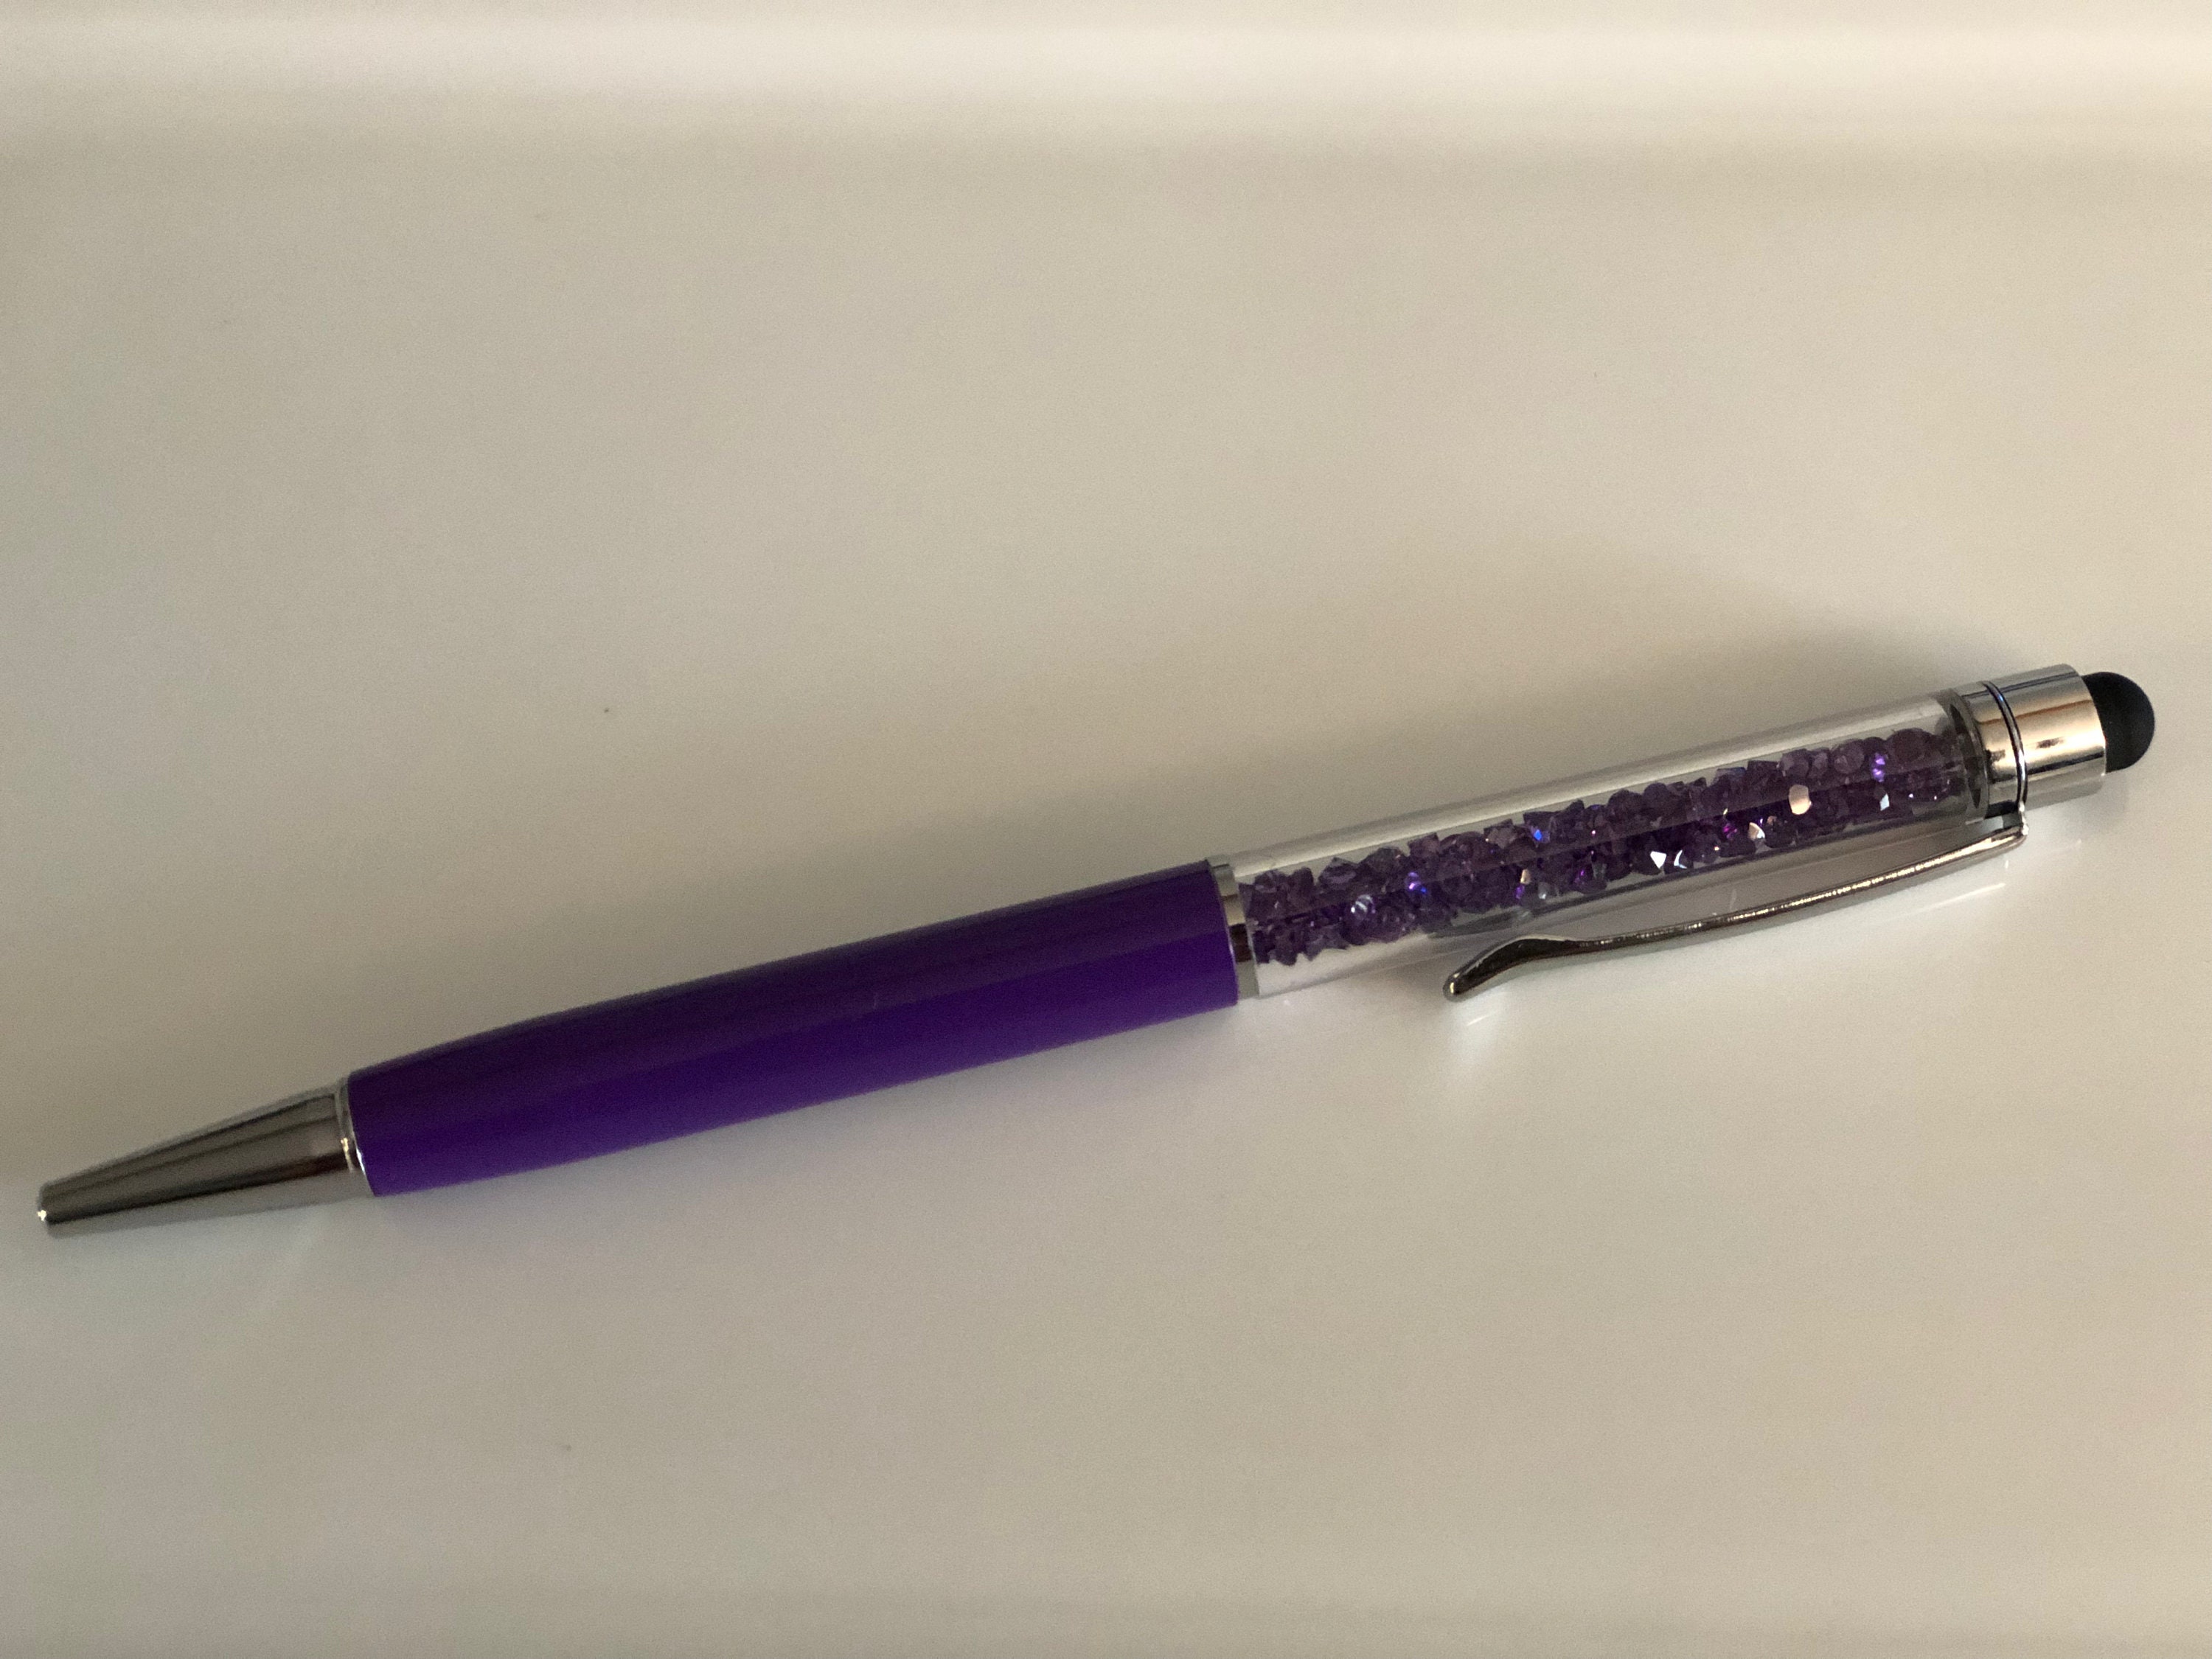 0579 CORNWALL CRYSTAL BAND HIGH QUALITY BALL POINT PEN IN PURPLE BY SEA GEMS 